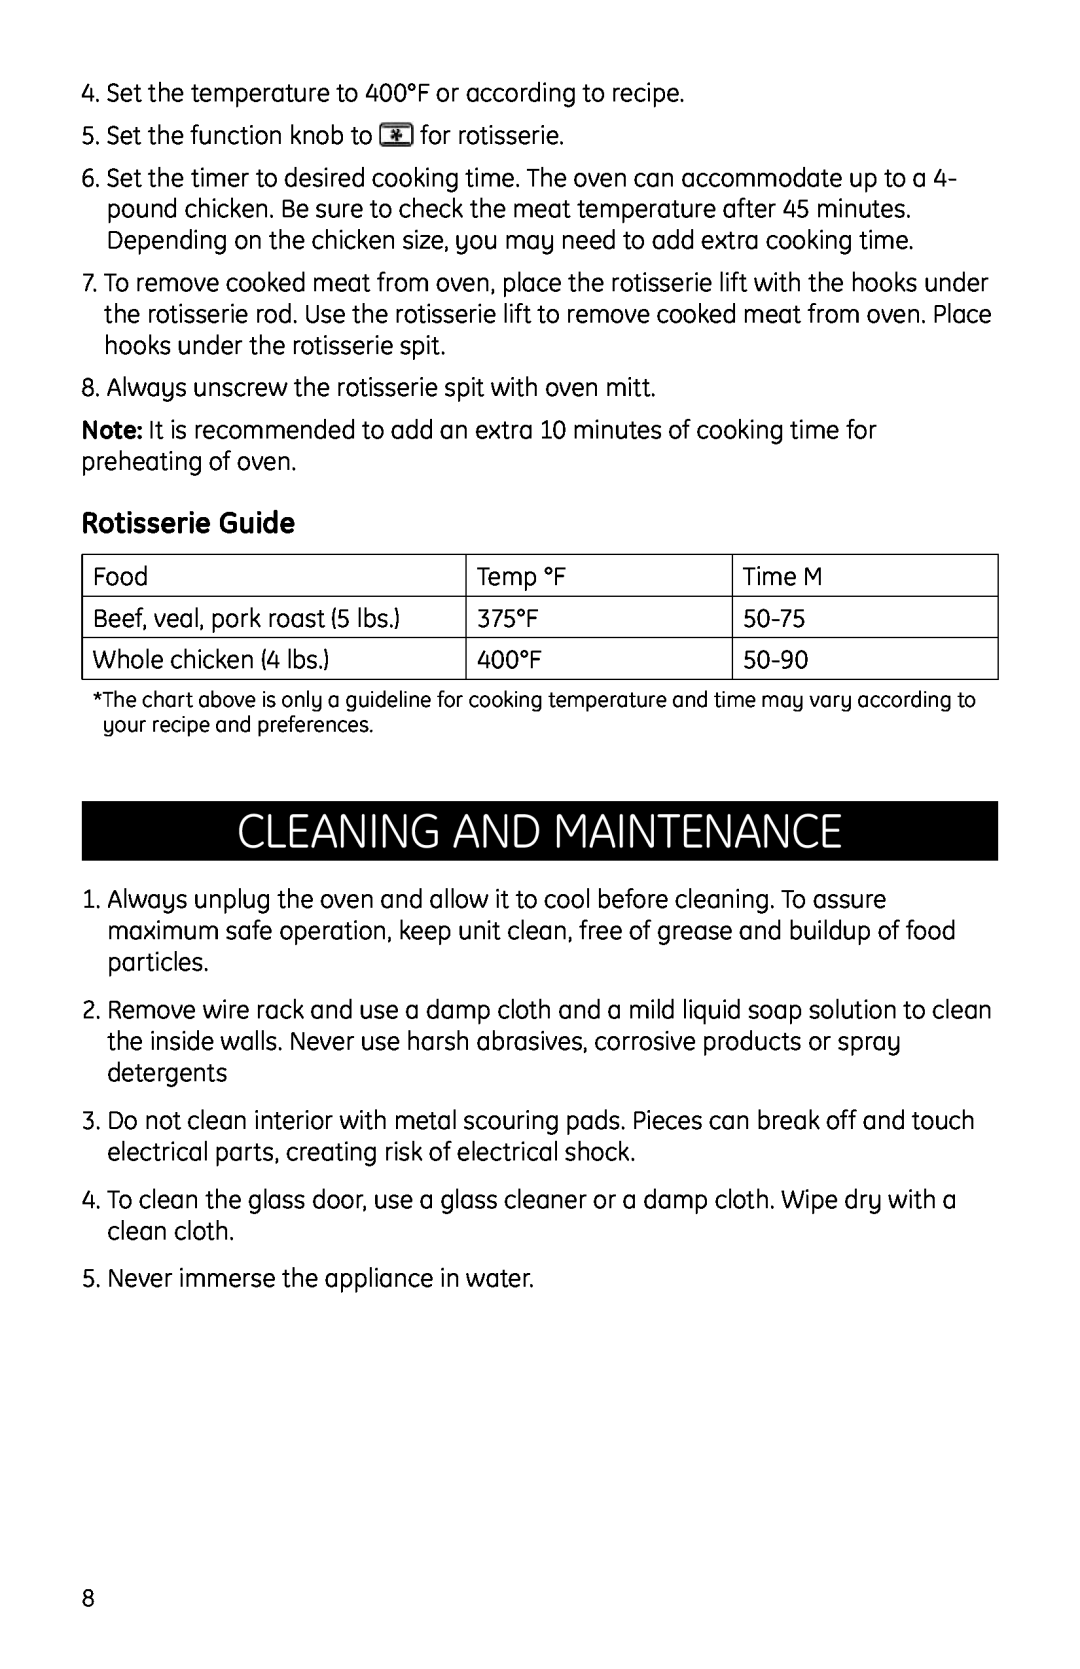 GE Countertop Oven manual Cleaning and Maintenance, Rotisserie Guide 